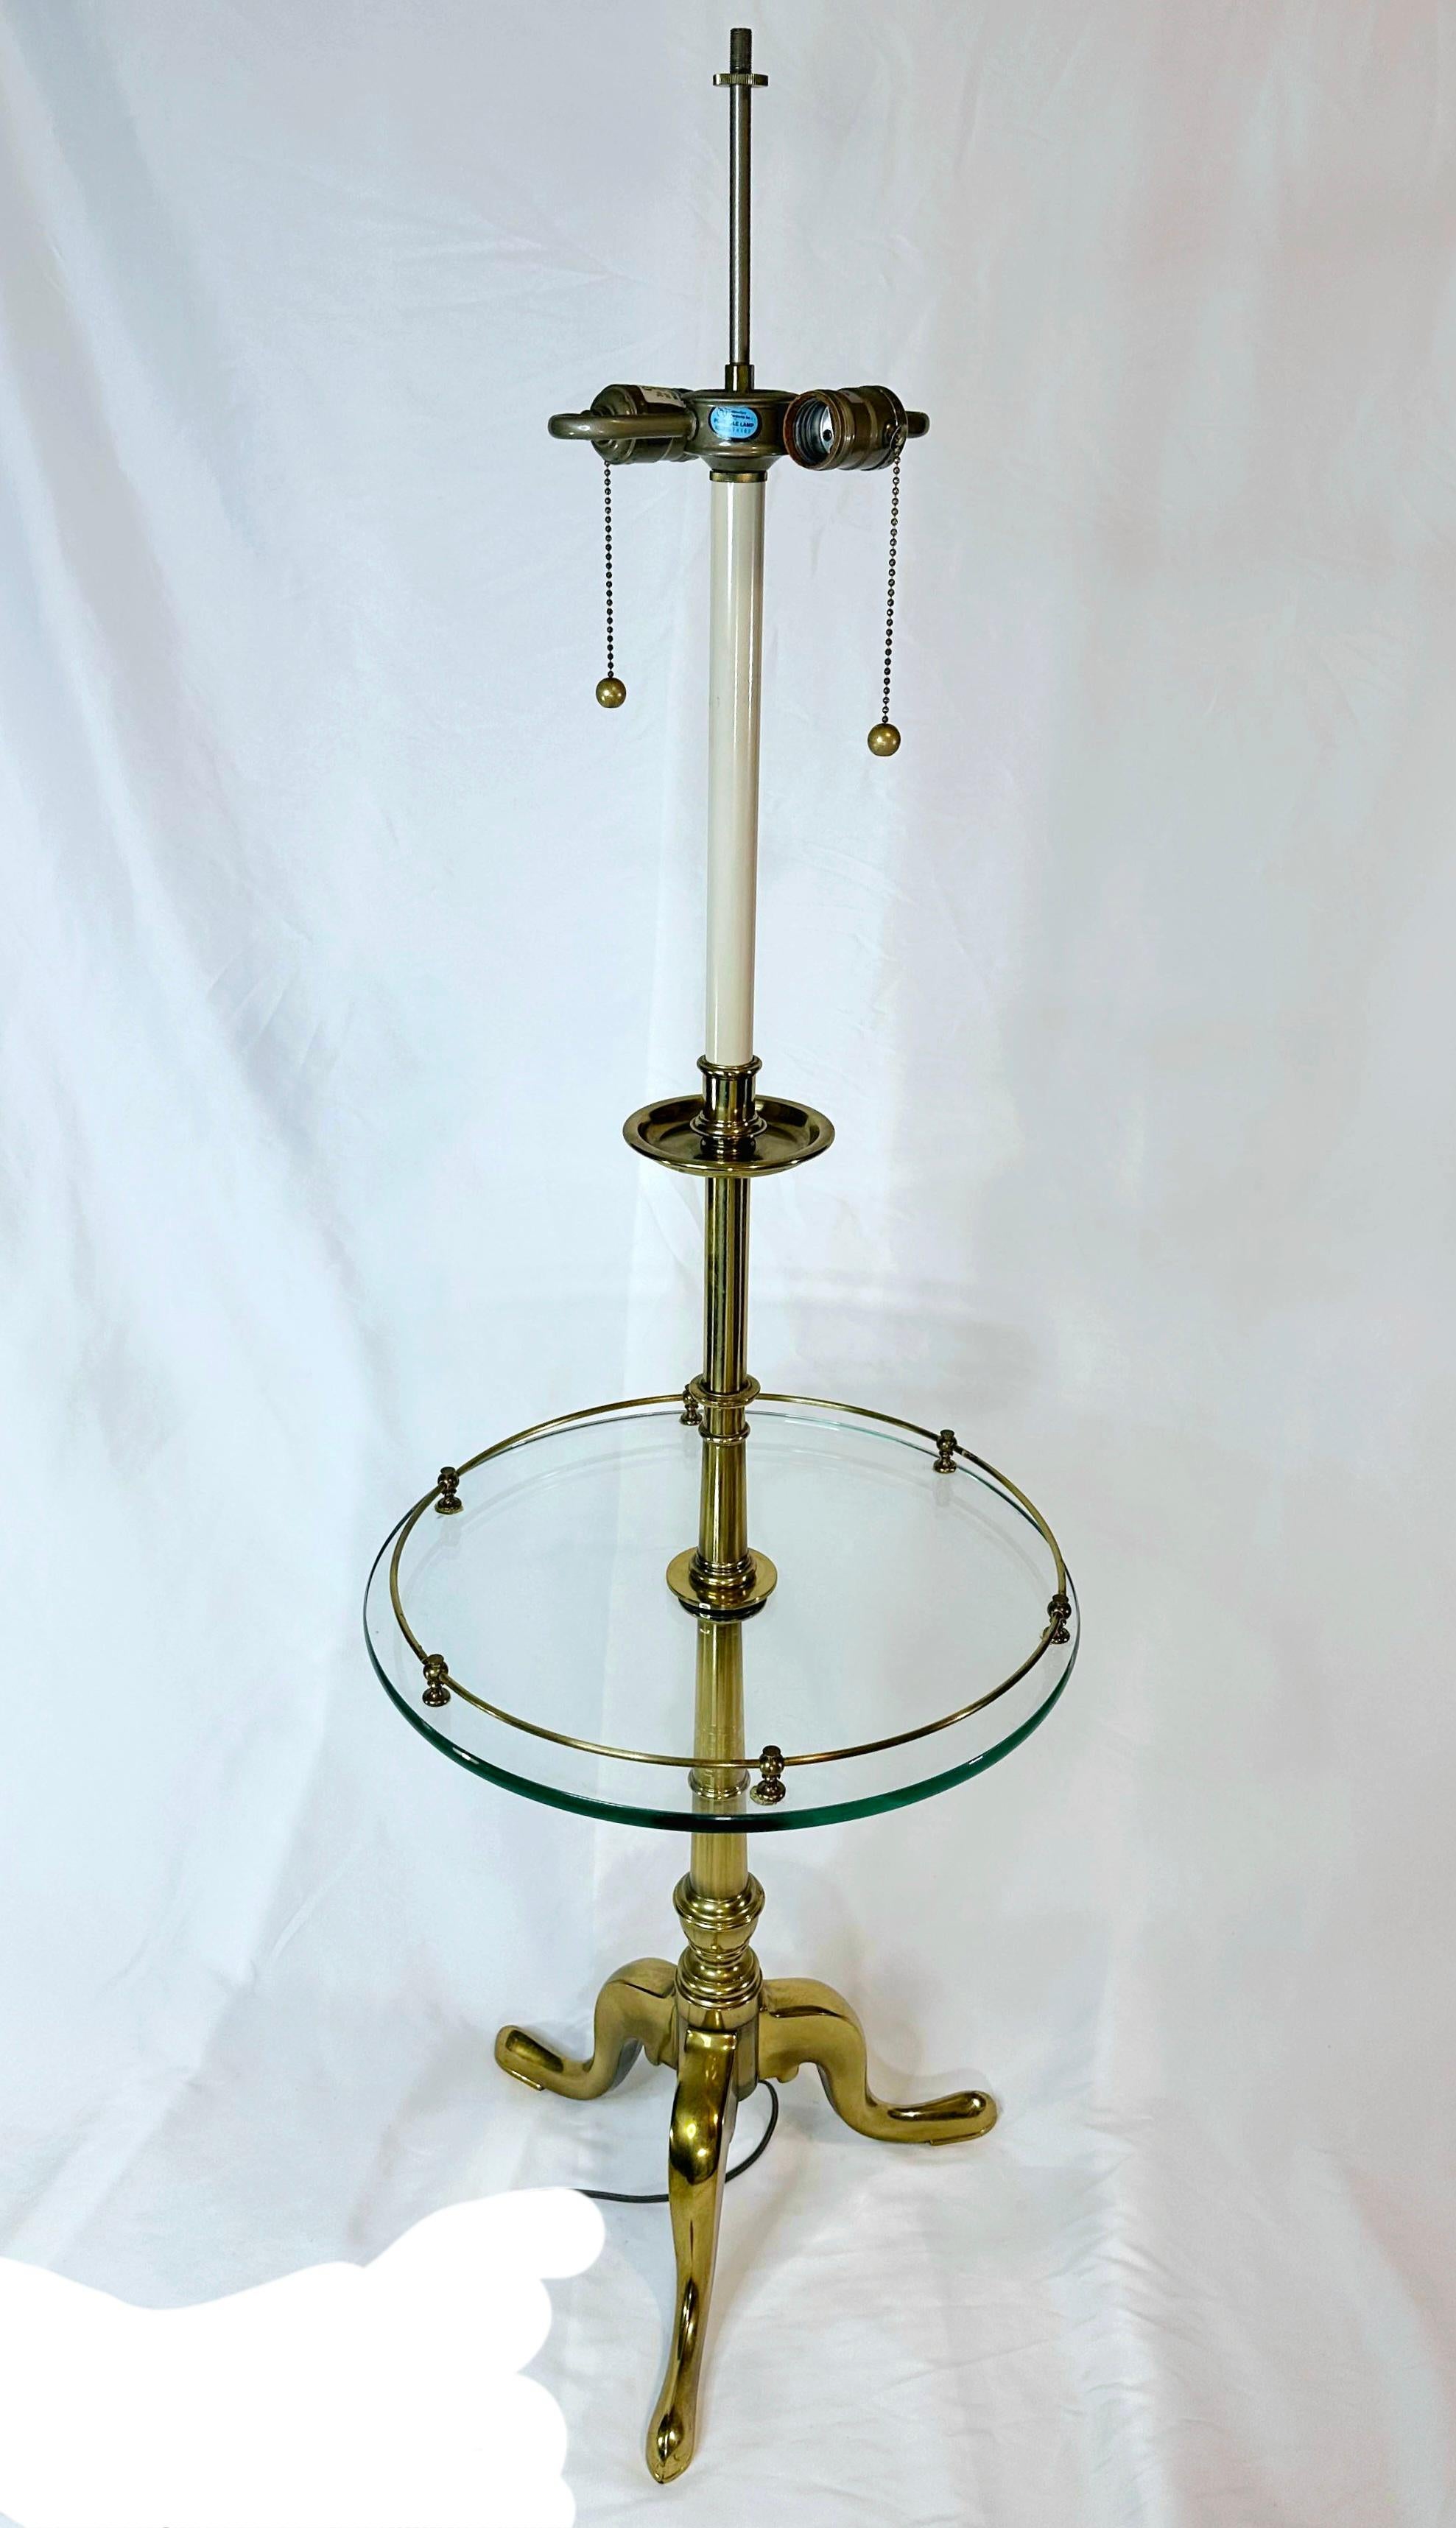 This MCM STIFFEL Tri-Leg Brass & Glass Table Floor Lamp.
Works well, is a stunning addition to any home. The lamp features a unique design, with a tri-leg base made of brass and glass that adds a touch of elegance to any room. The lamp is perfect